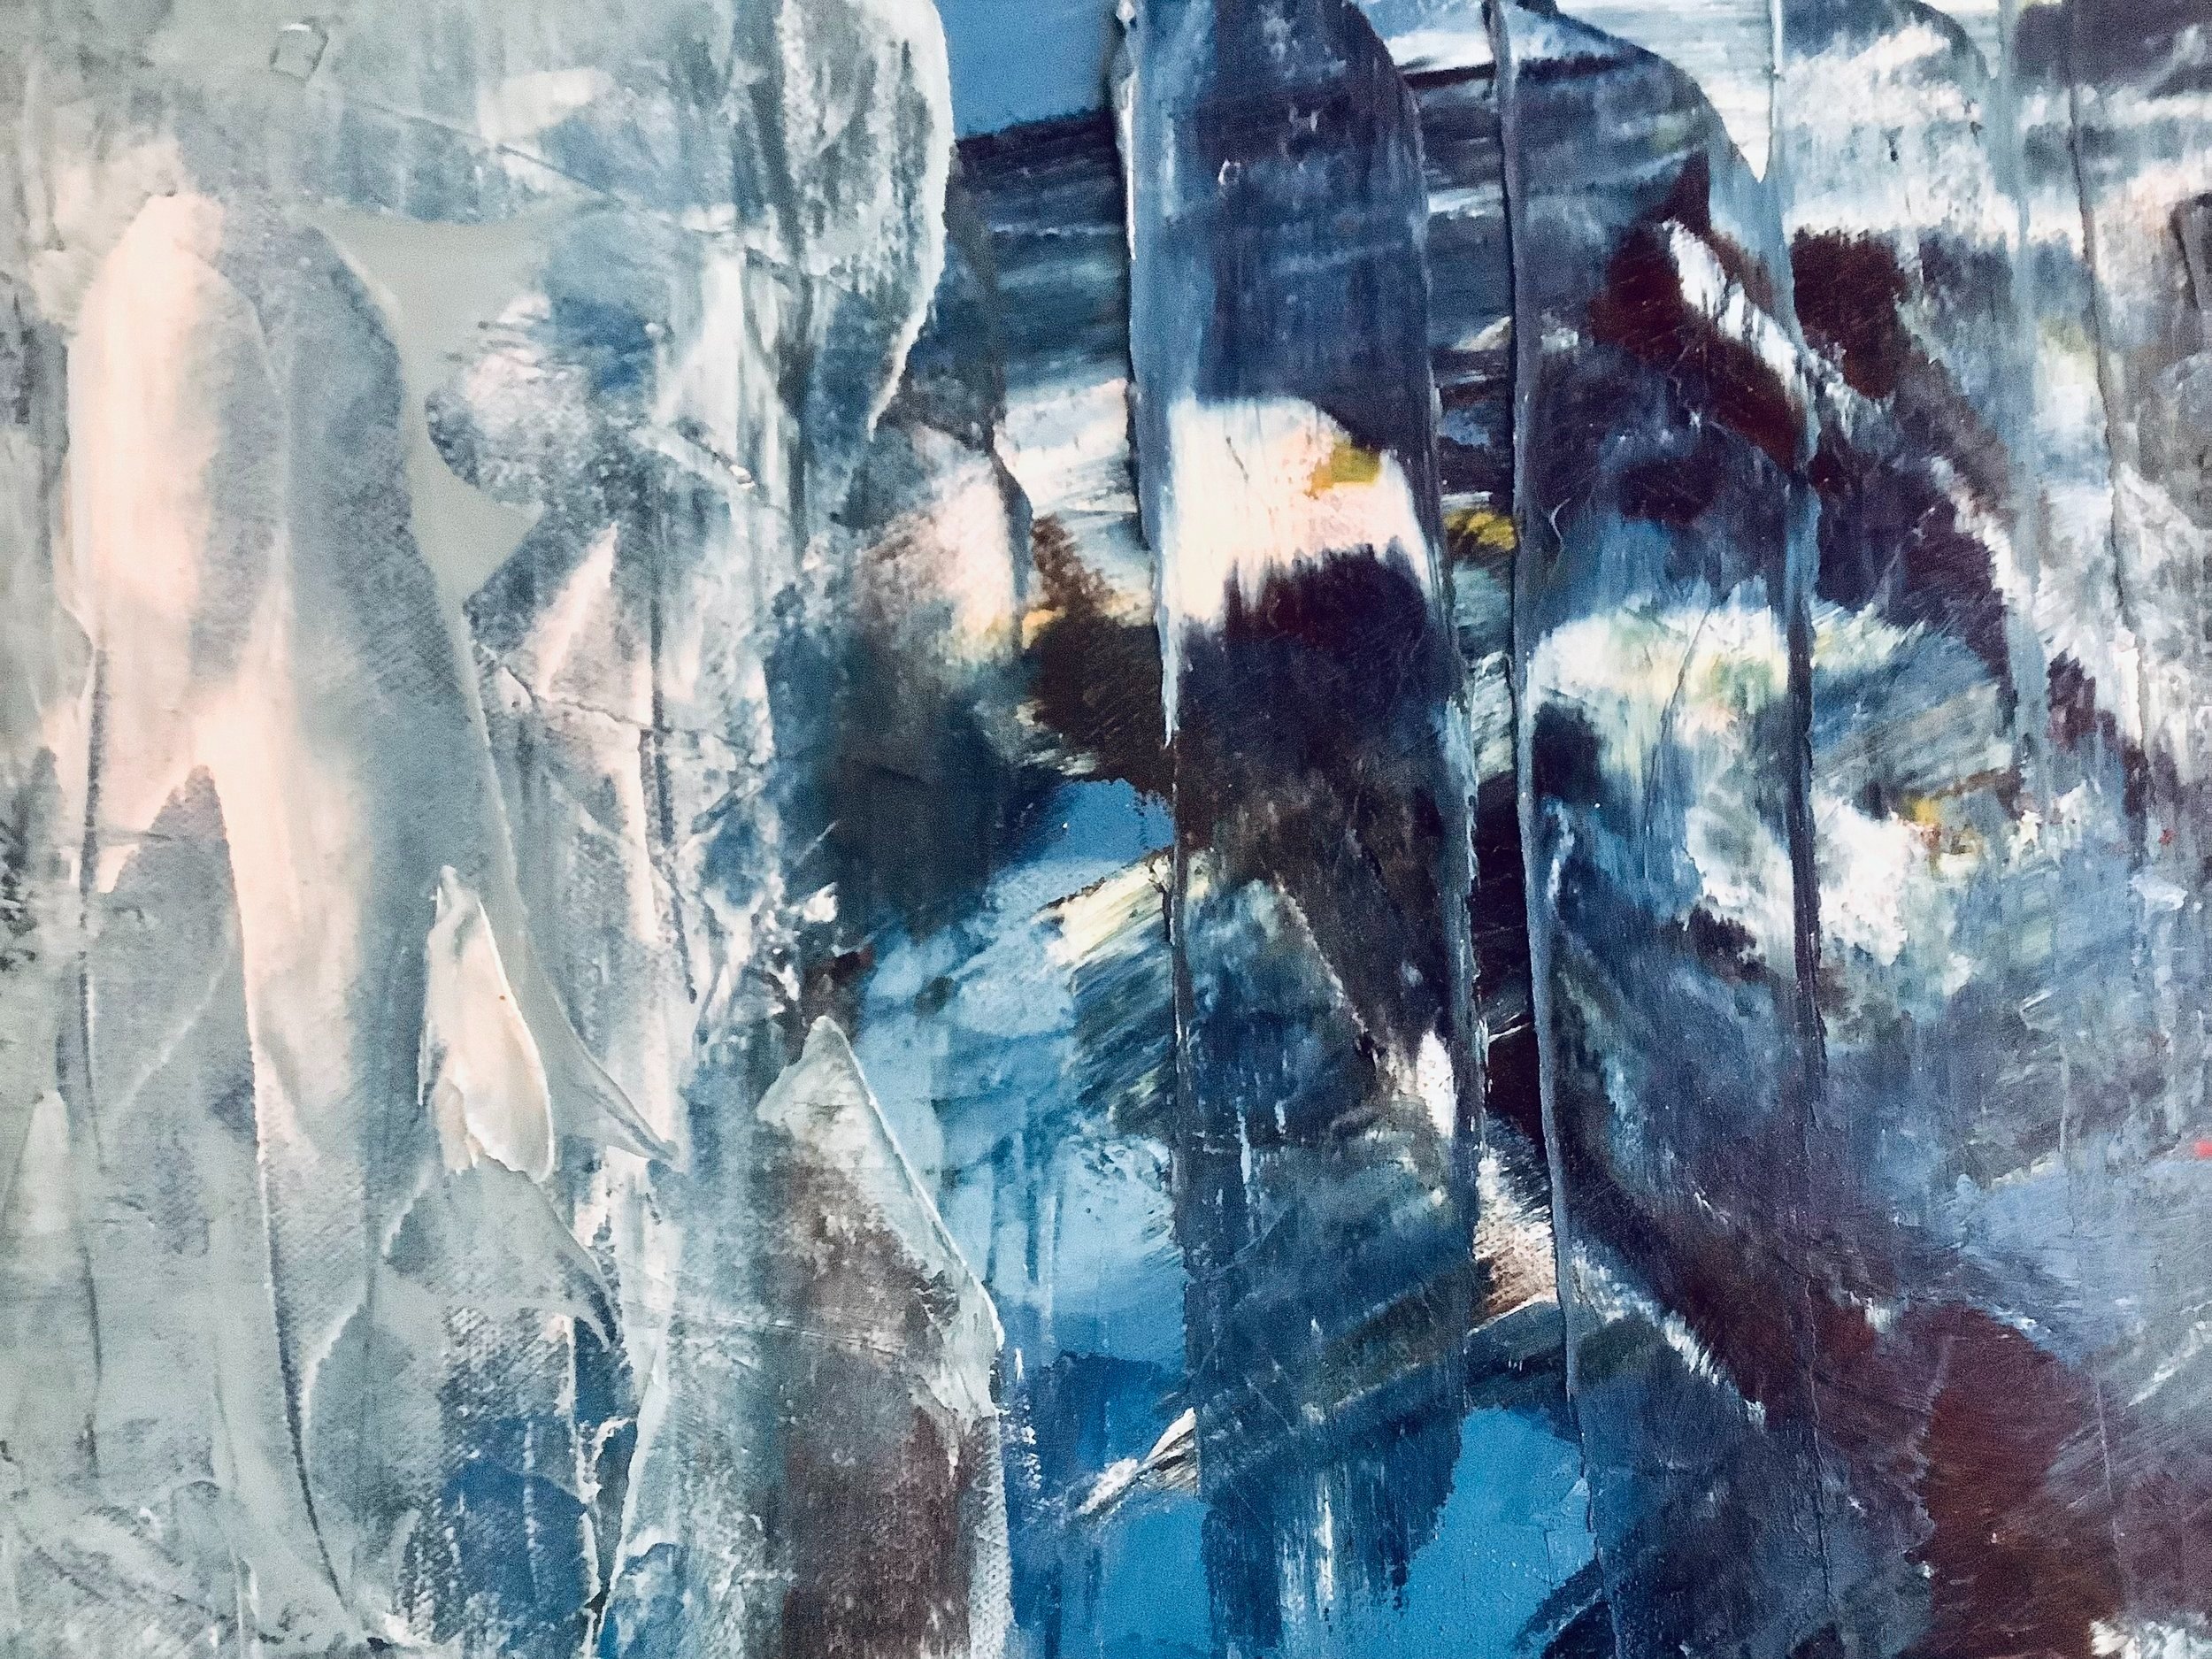    Prussian Blue Ice  - oil on canvas, 12-inches x 16-inches SOLD  